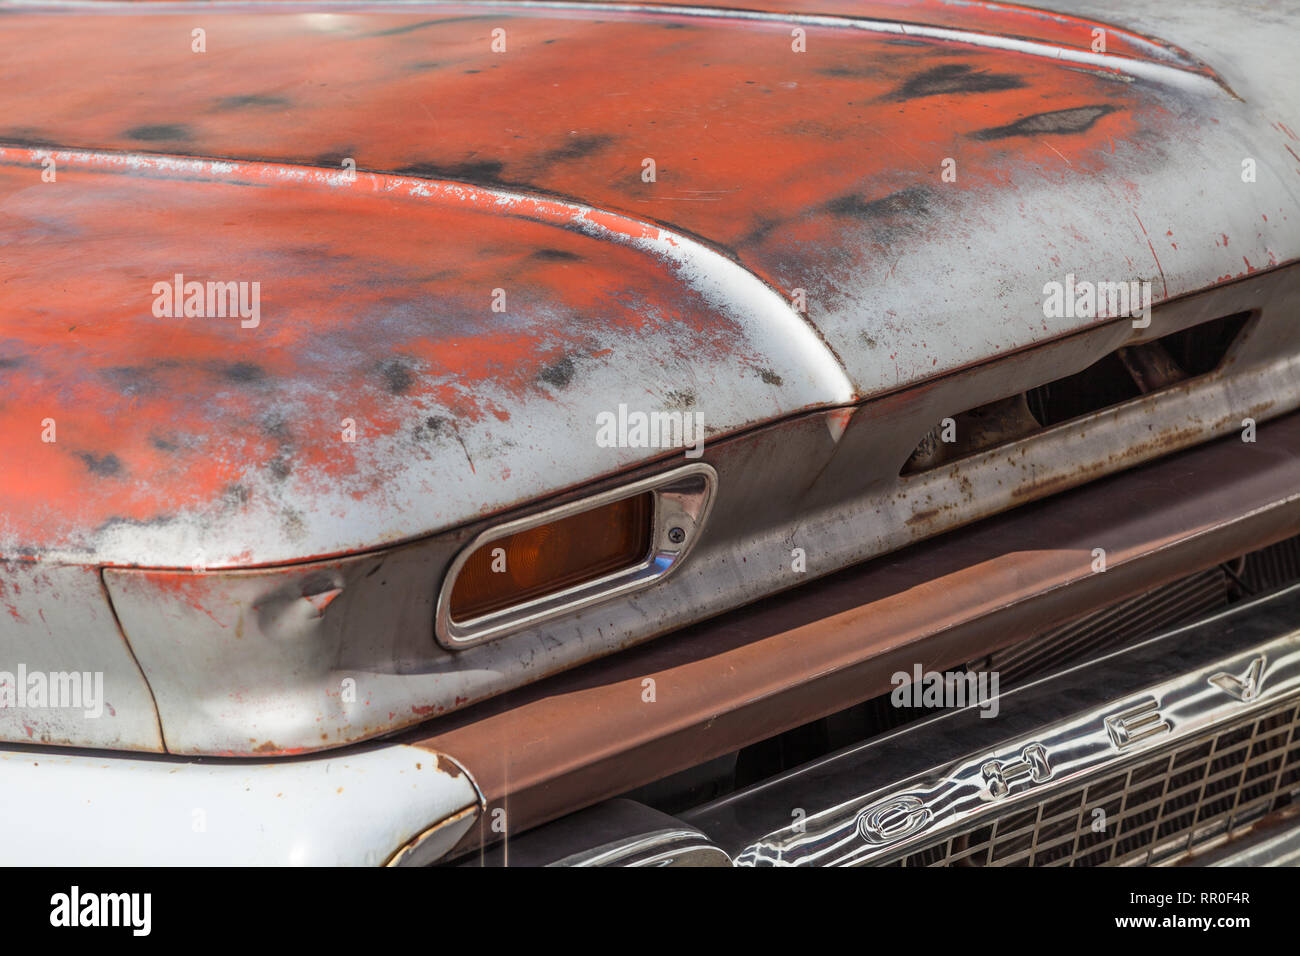 Abstract image of the hood of an old Chevrolet pick-up truck Stock Photo